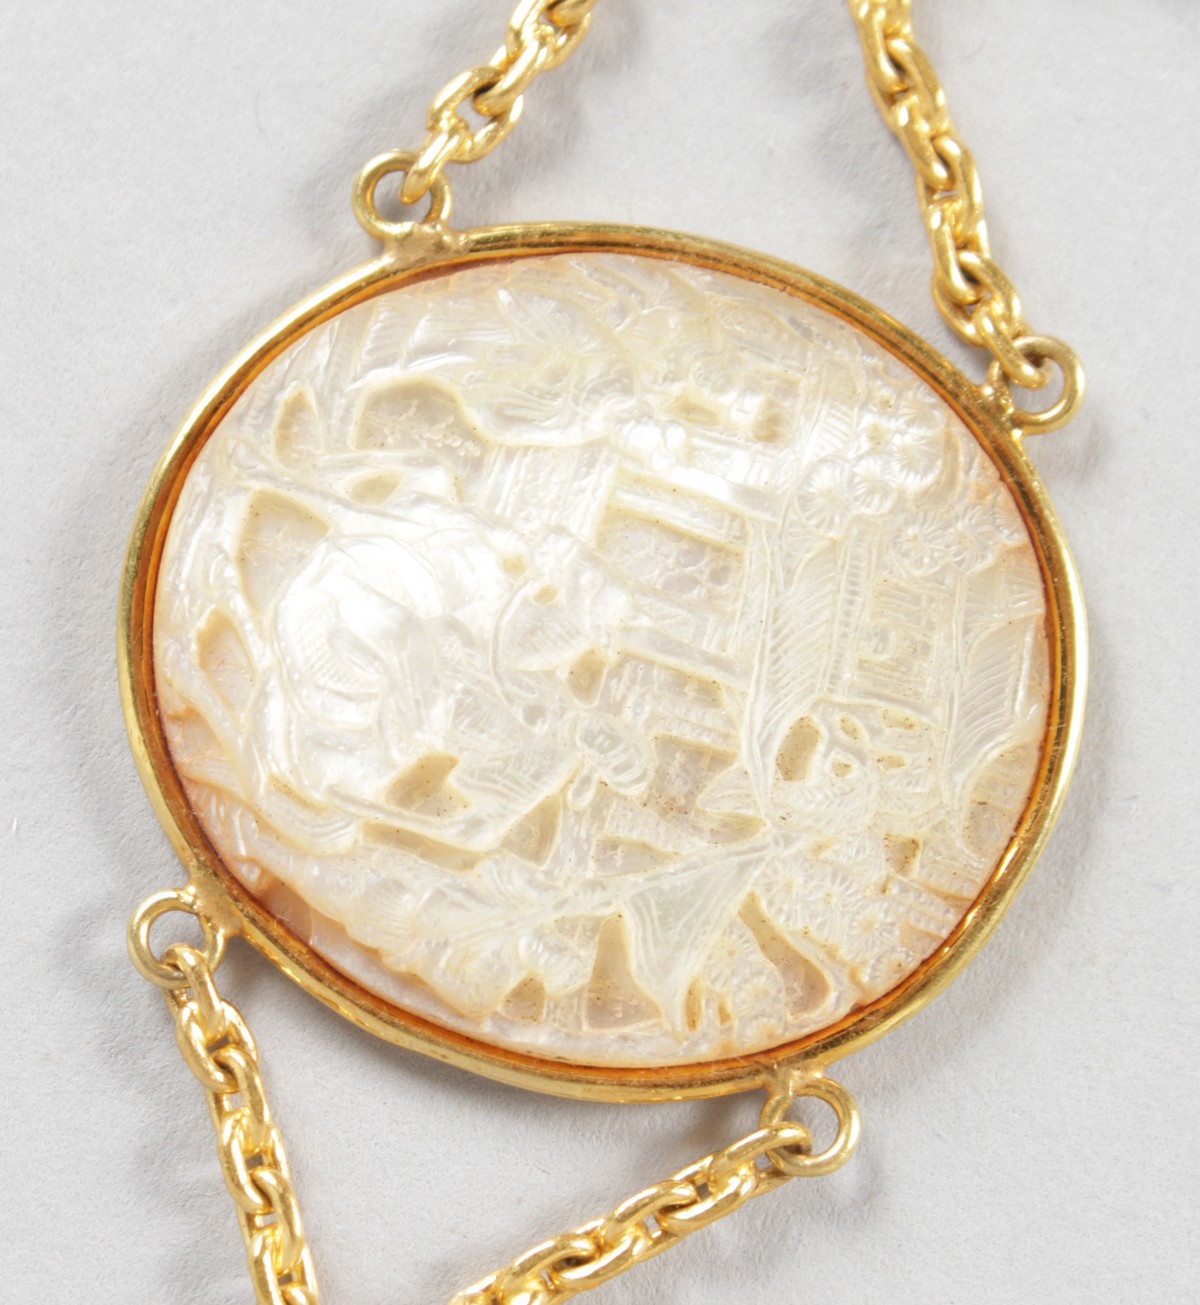 A SUPERB GOLD BRACELET set with SEVEN CARVED CHINESE MOTHER-OF-PEARL OVALS. - Image 4 of 9